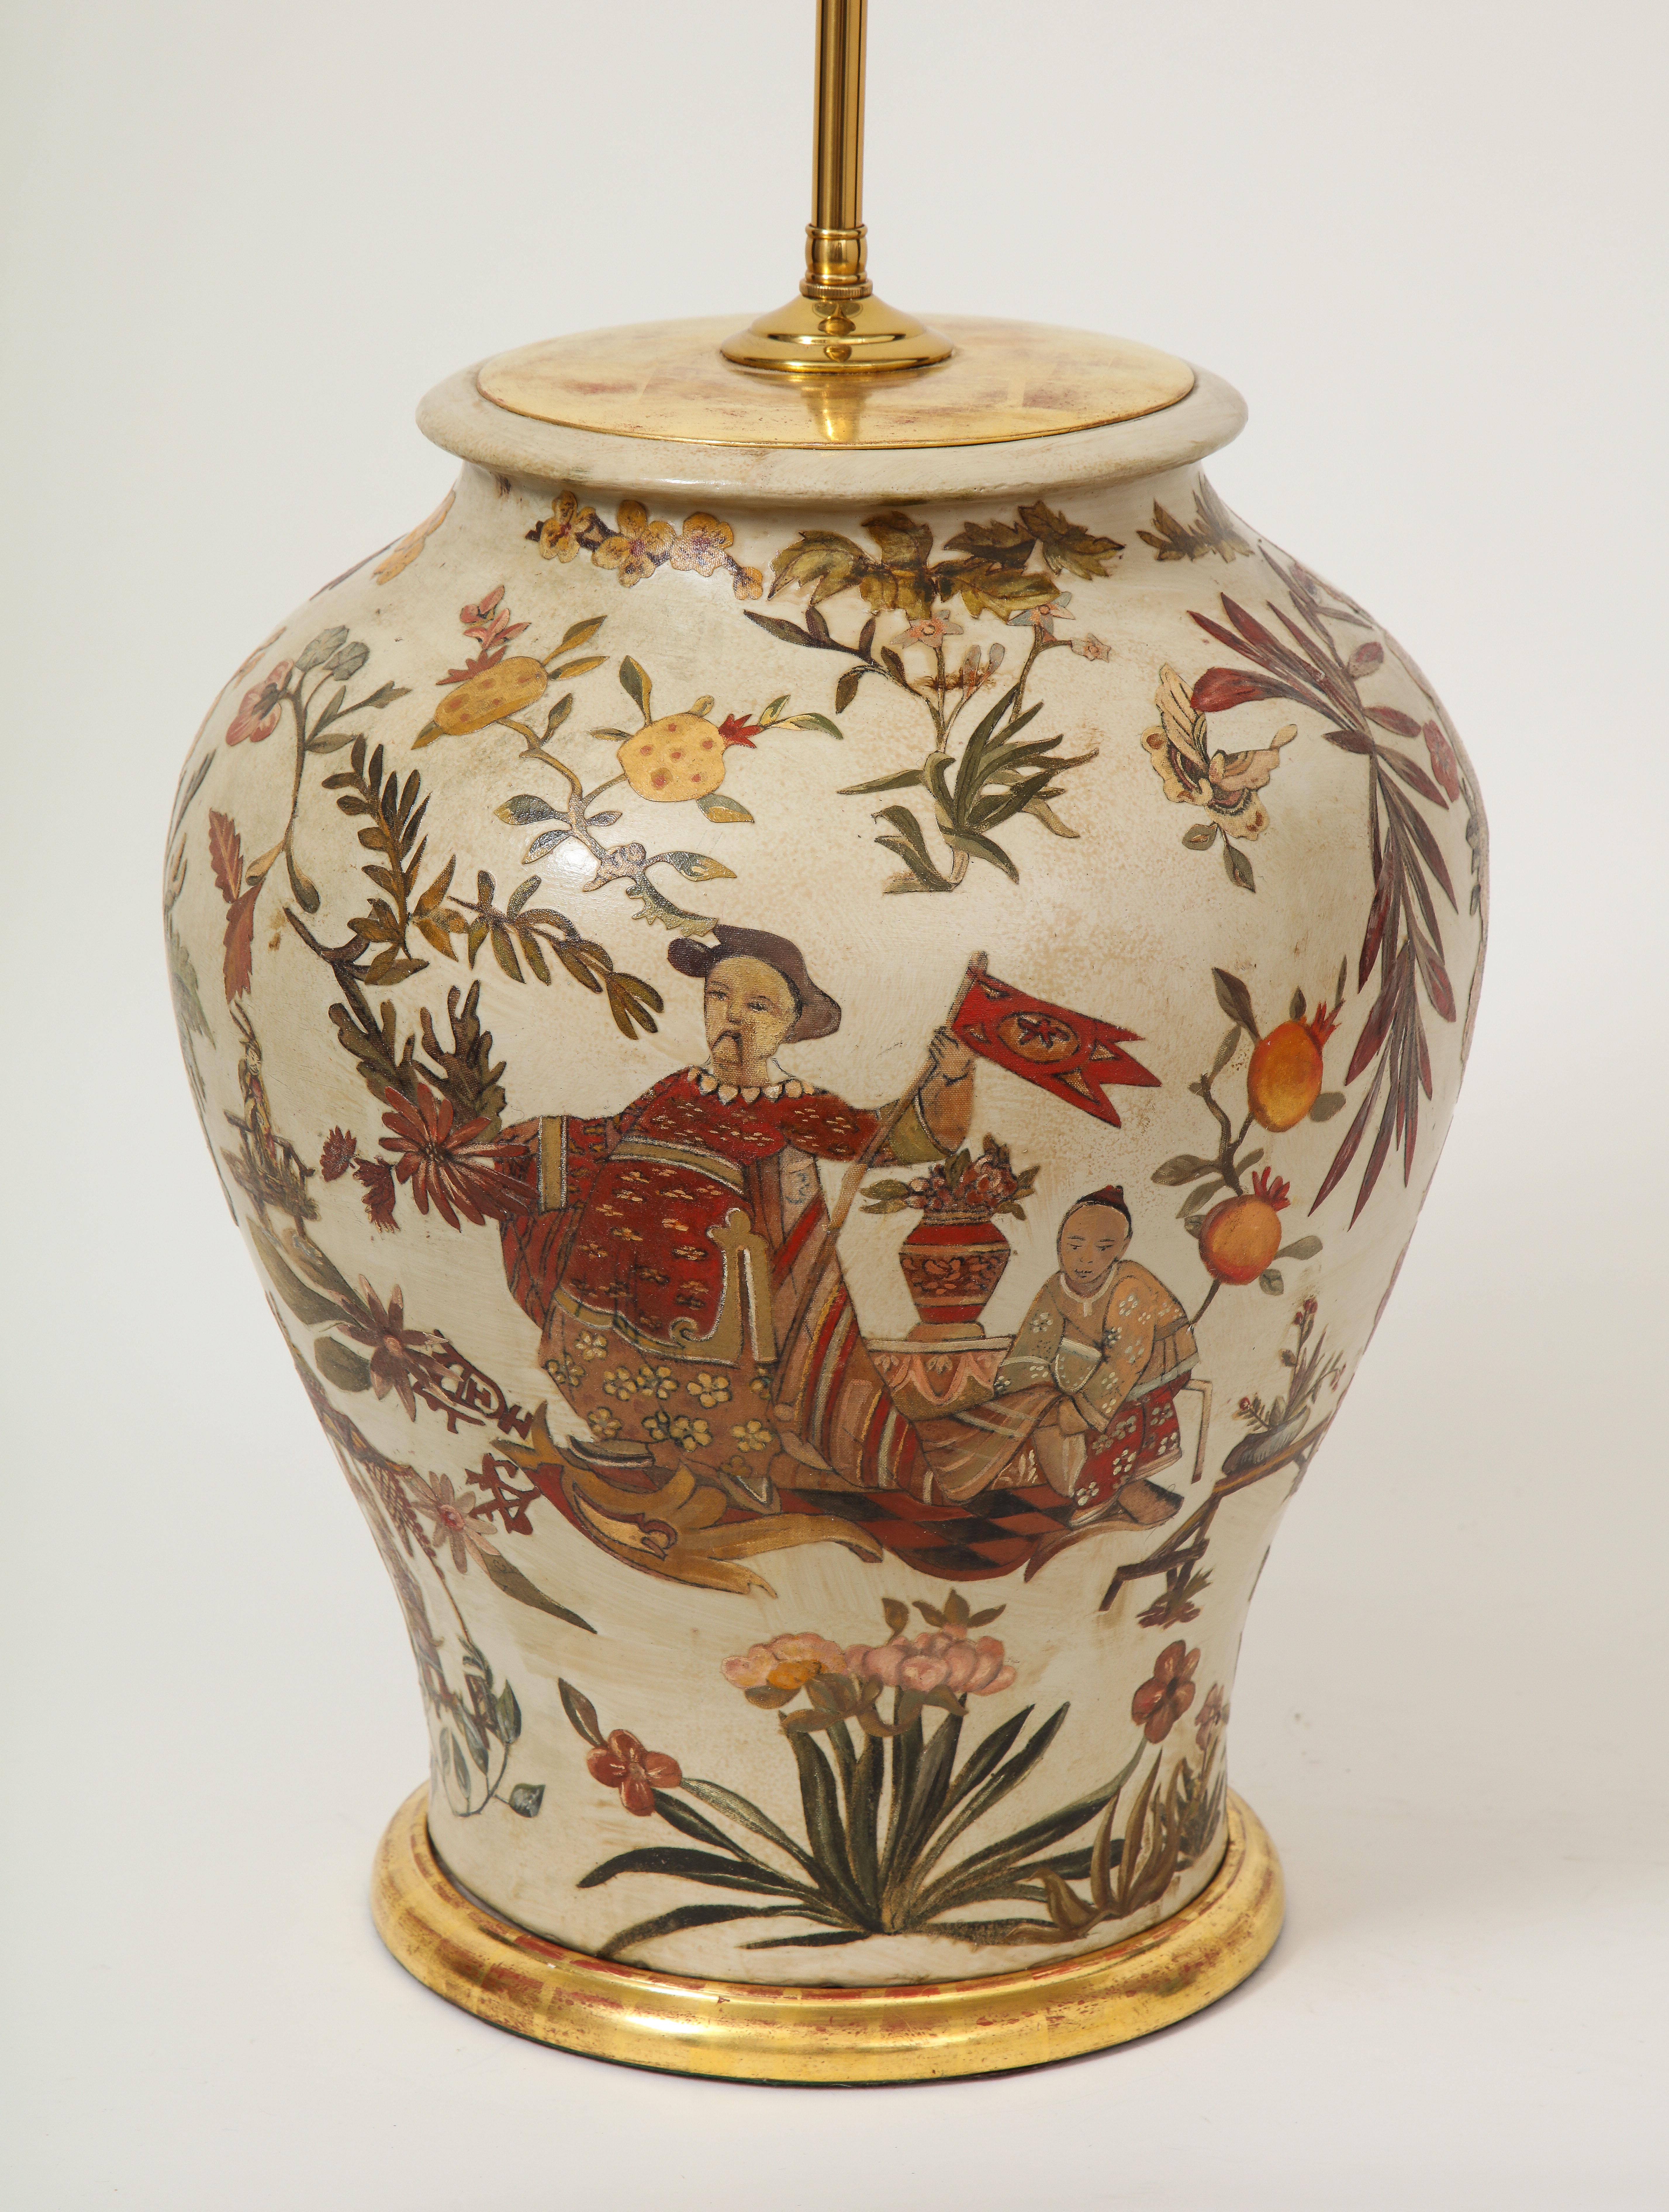 The baluster form terra cotta vase decorated with Chinoiserie decoration including a Court figure waving a banner with an attendant, persimmons, orchids, peonies and other emblems of good fortune on cream ground. 